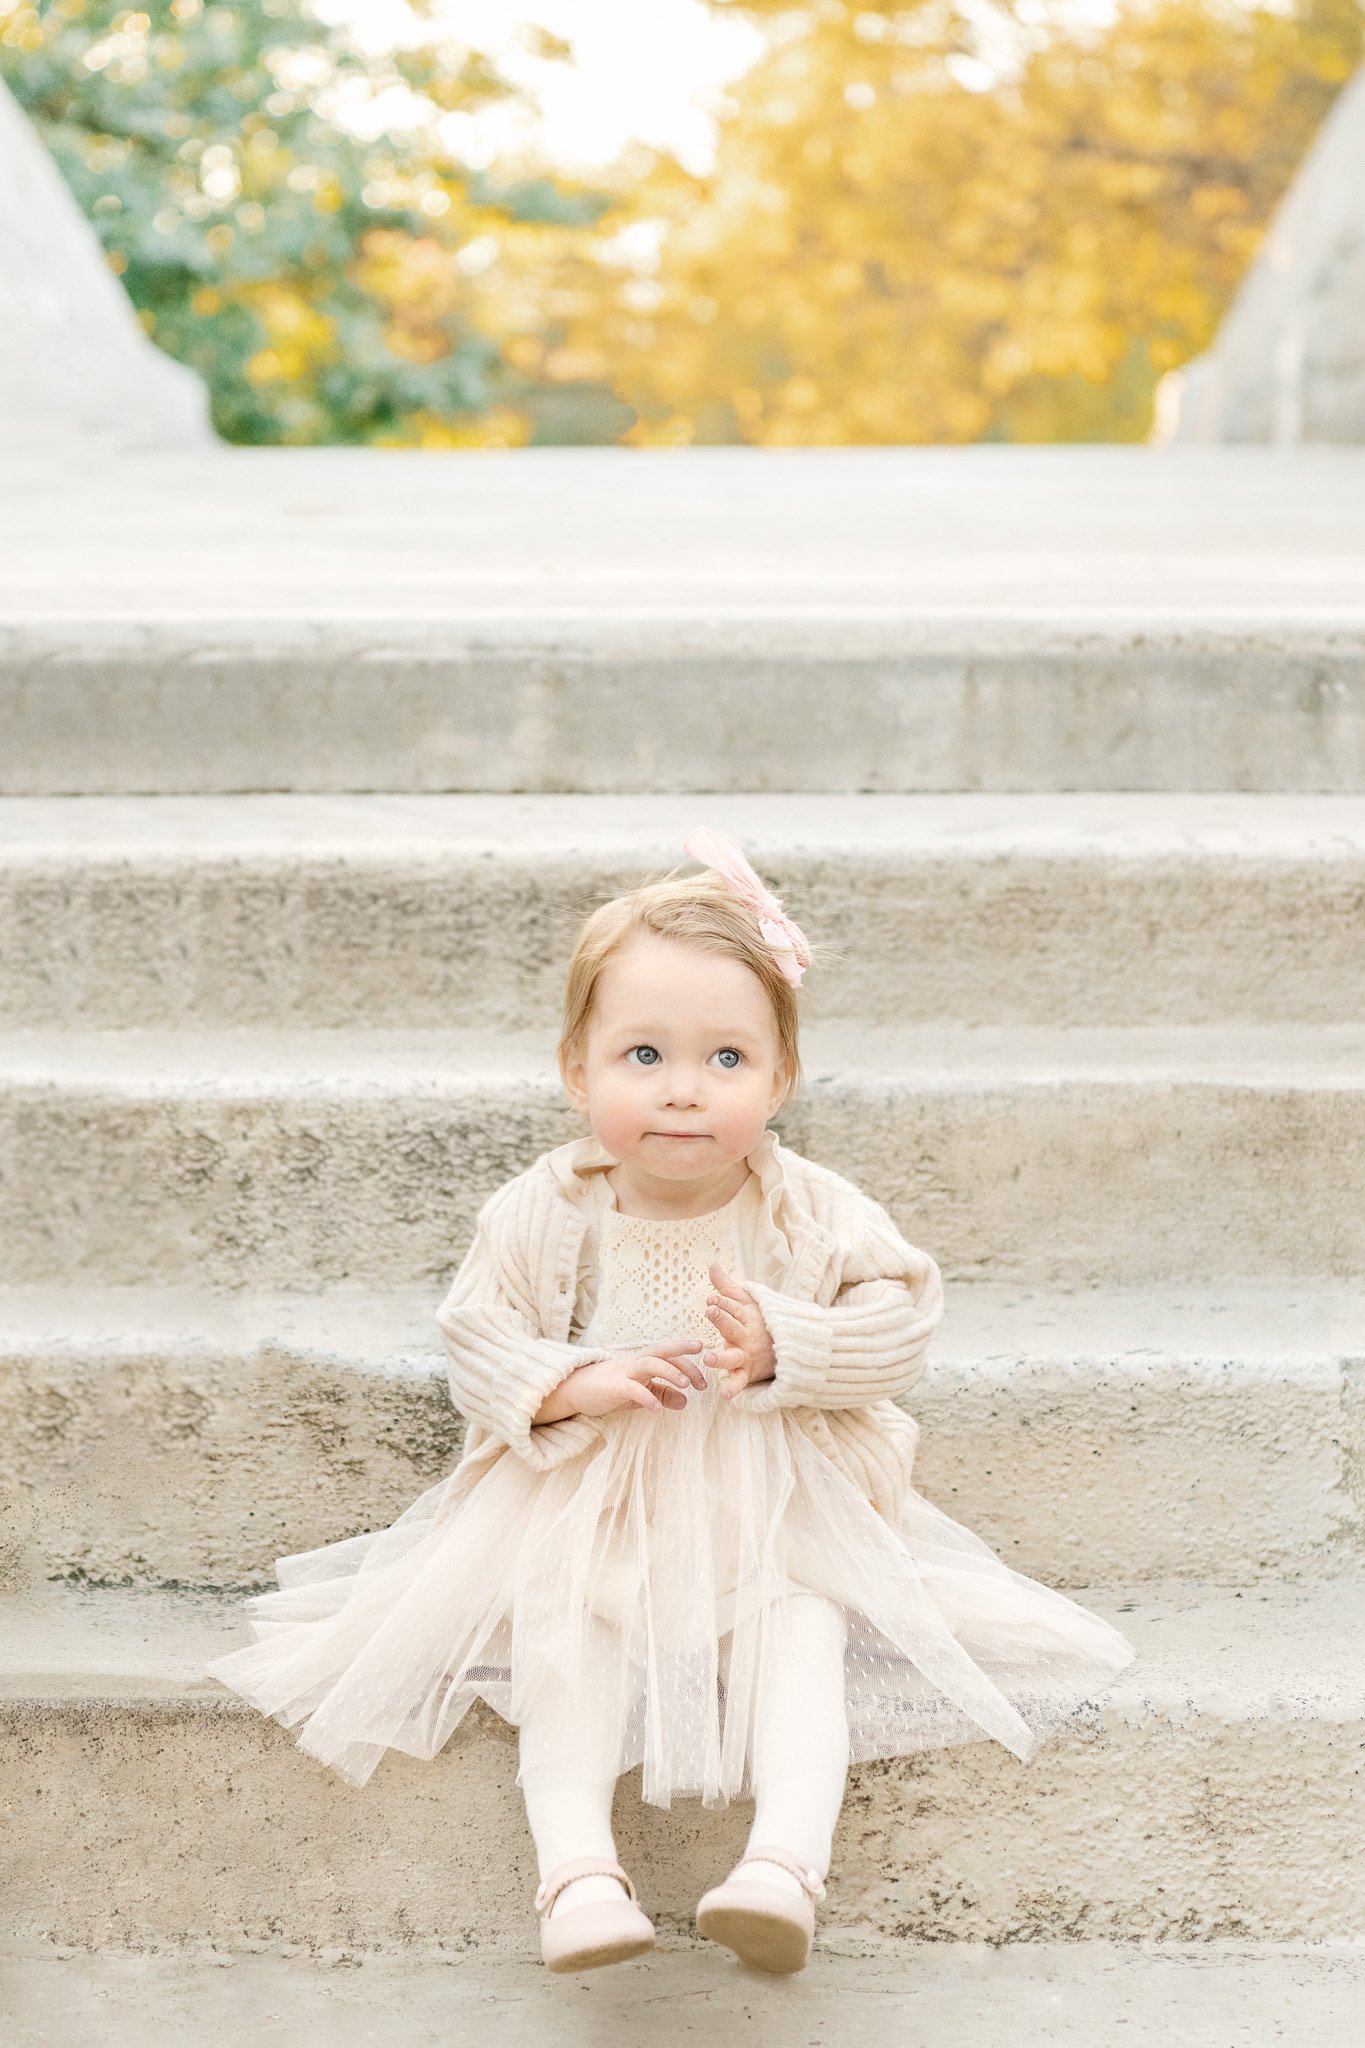  A darling toddler little girl with a tulle dress and pink bow sits on the stairs by Nicole Hawkins Photography in NJ. reasons to take family pics in the fall #NicoleHawkinsPhotography #NicoleHawkinsFamilies #FallFamilyPhotos #FallPortraits #NJFamily